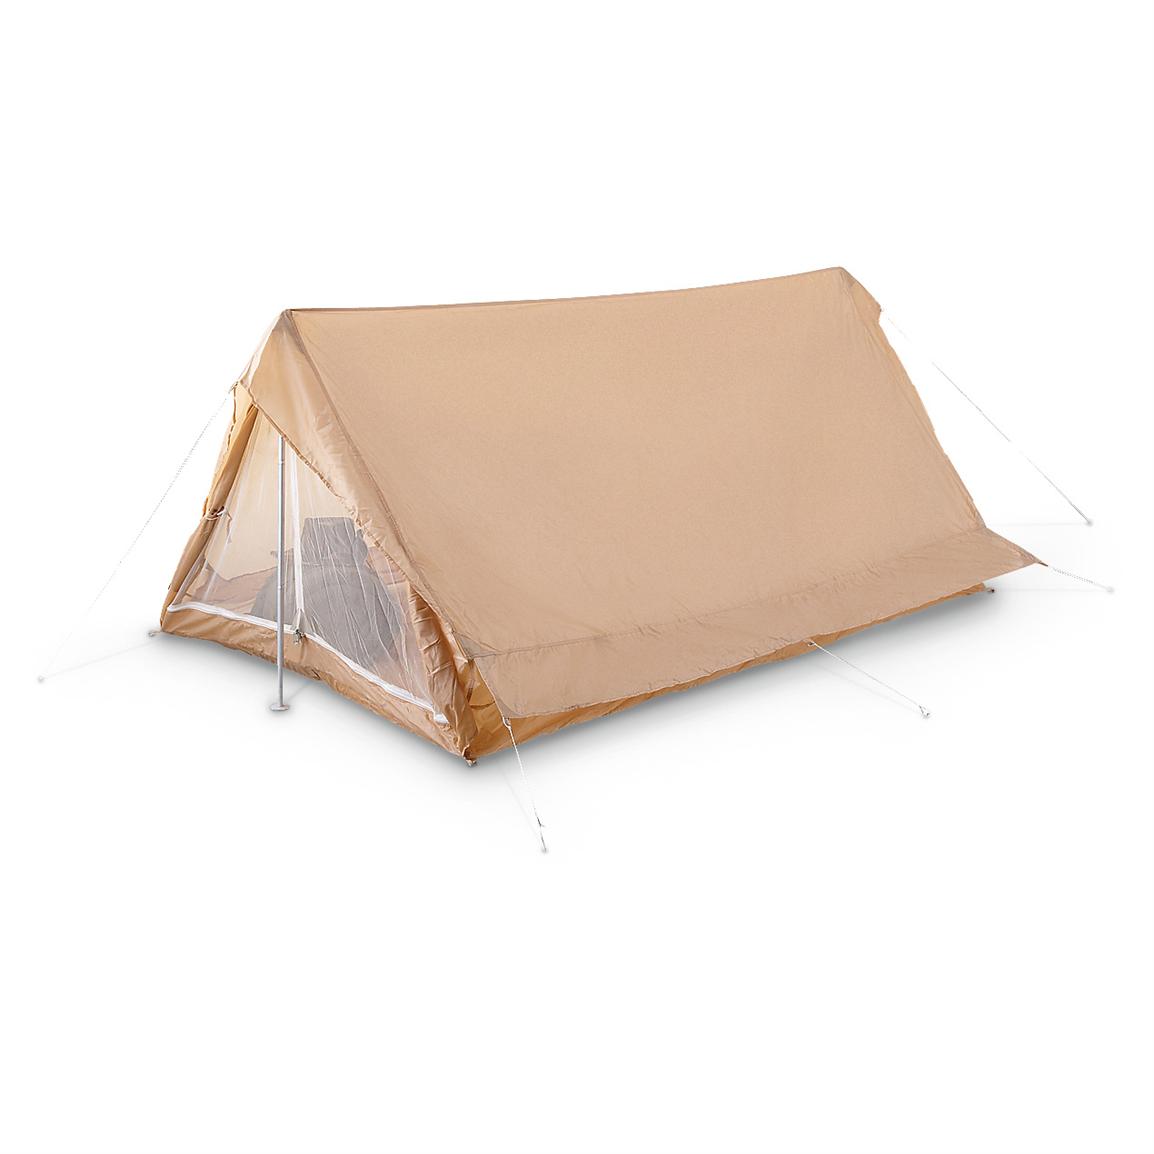 French Military Surplus Tropical Tent